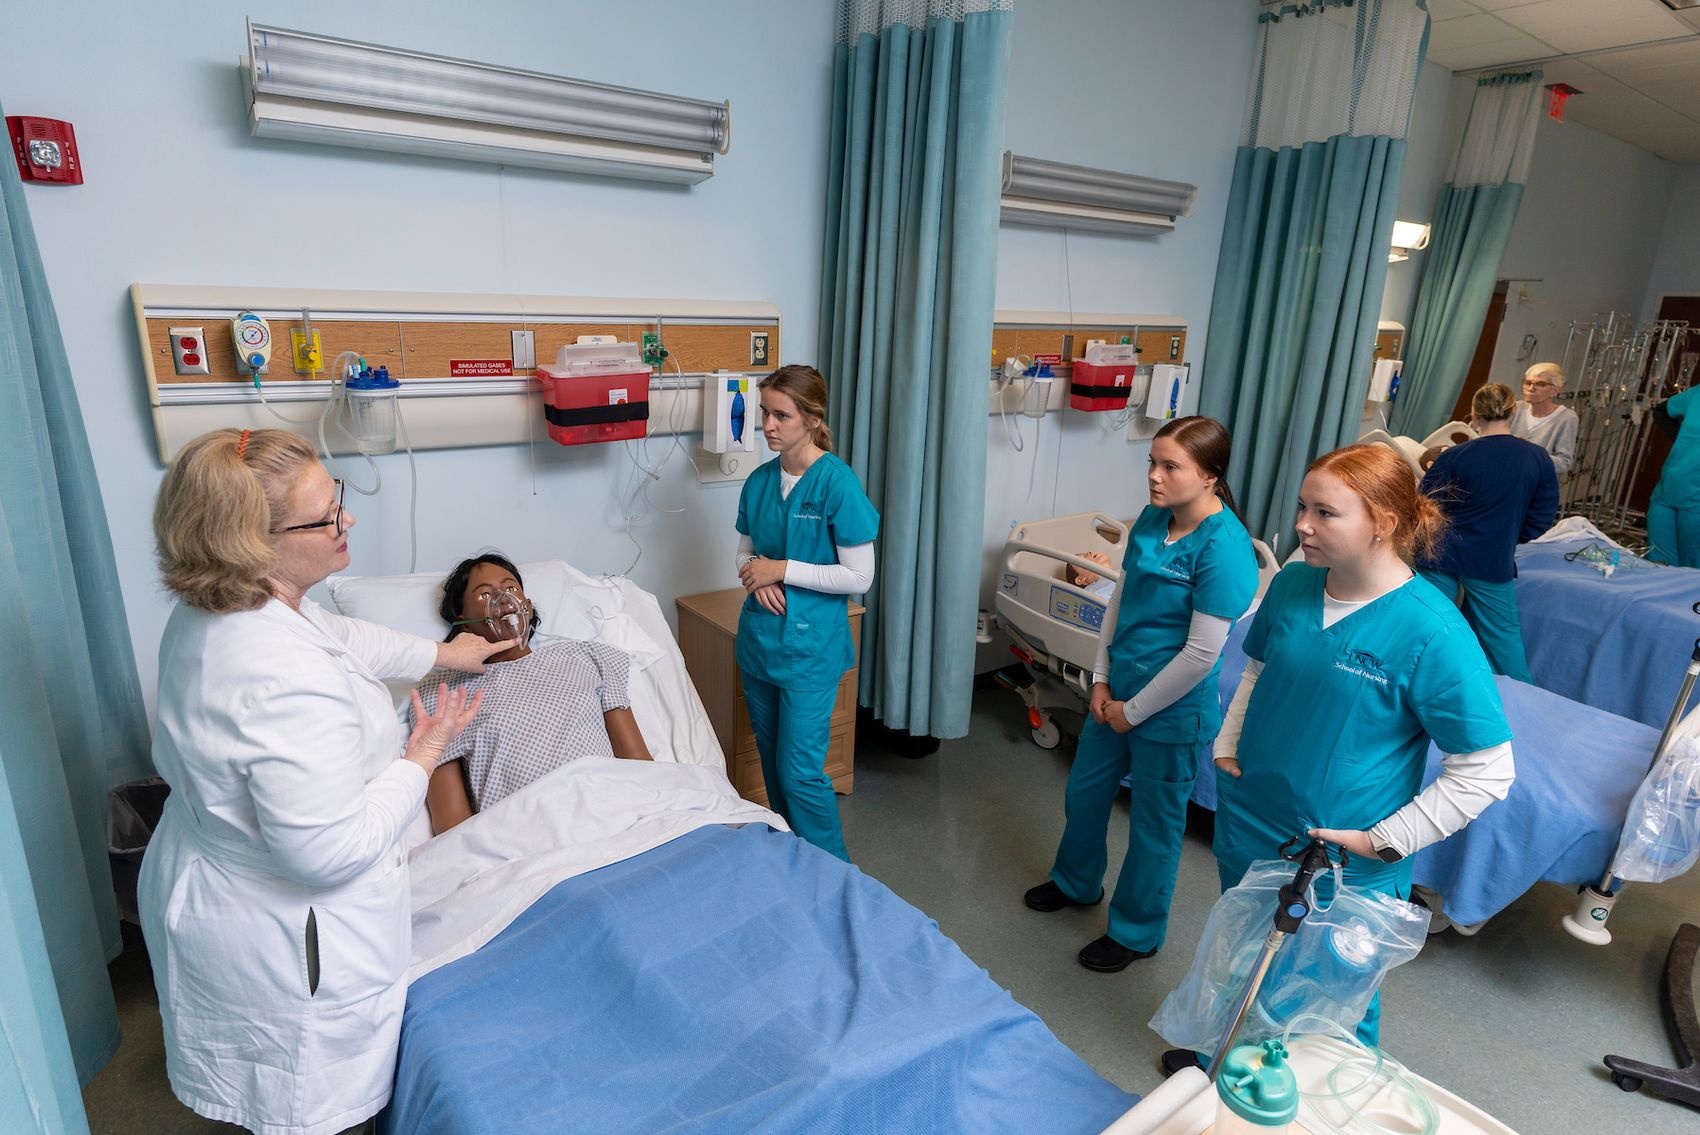 Nursing students work in the simulation lab in McNeill Hall on the campus of UNCW.